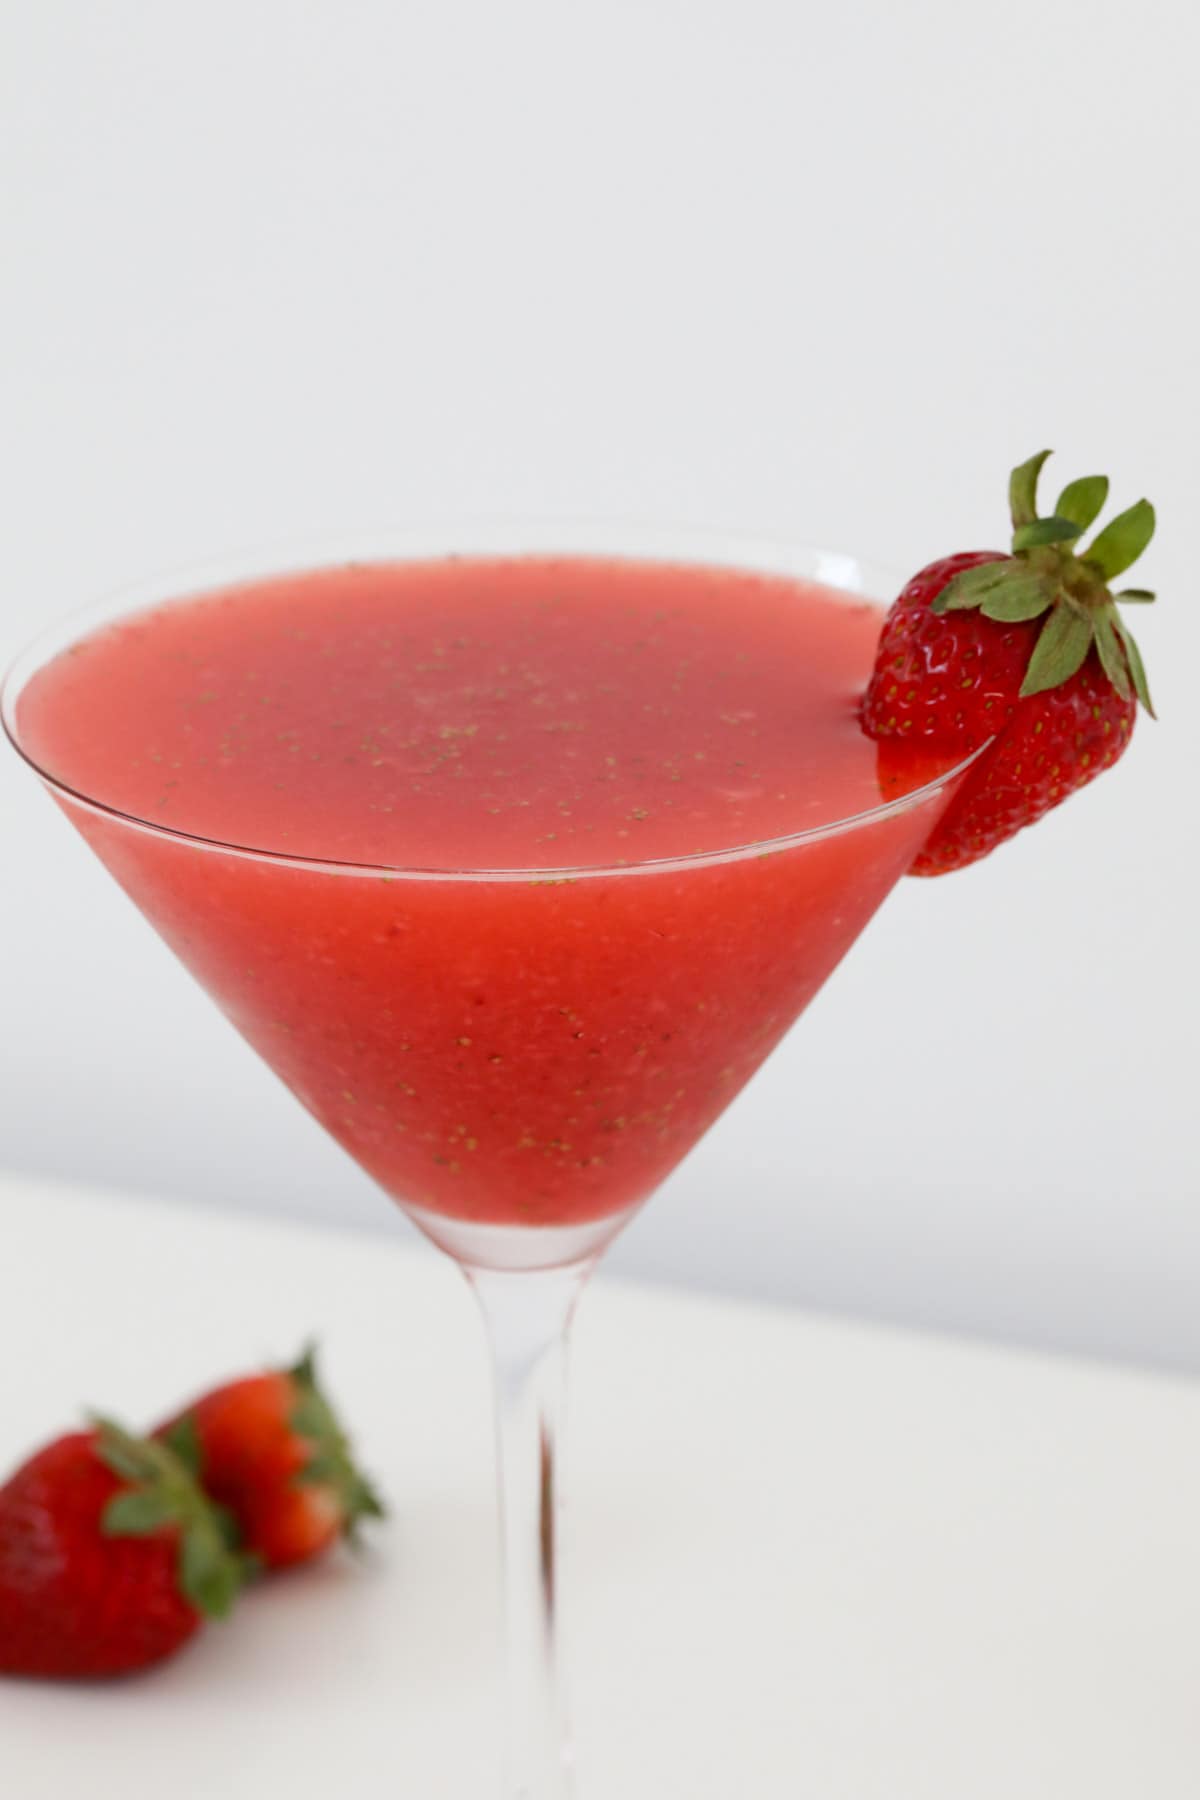 Strawberry cocktail in a martini glass garnished with a fresh strawberry.